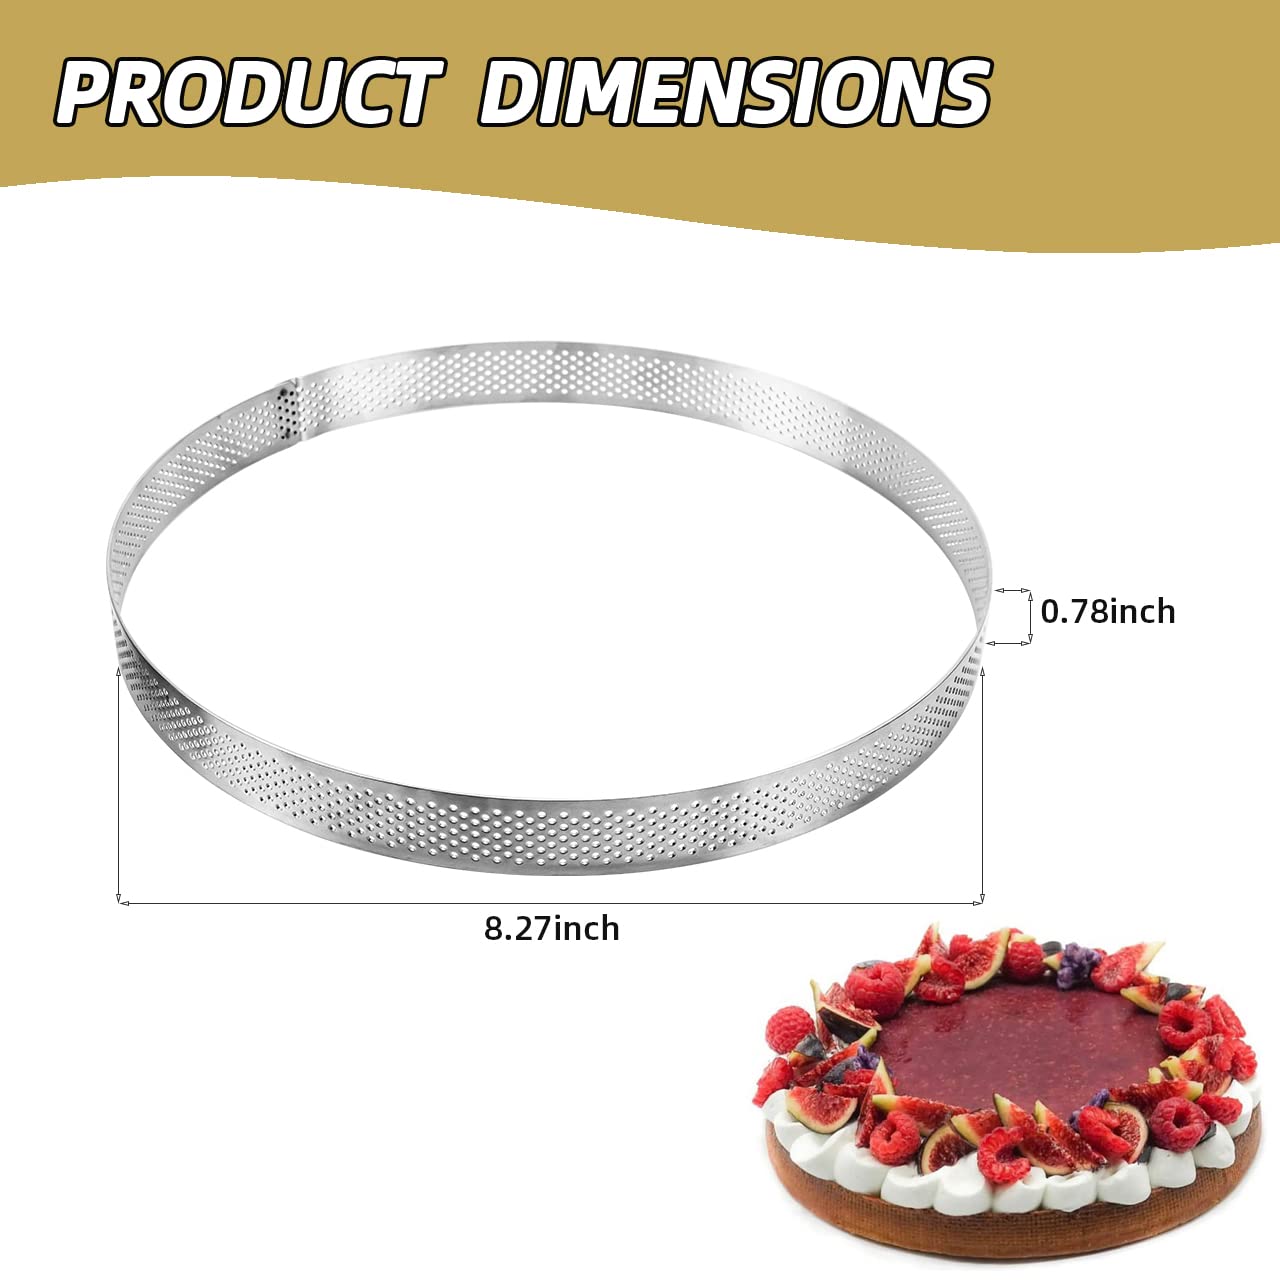 Uyauld Stainless Steel Perforated Tart Ring, 8 inch Heat-Resistant Cake Mold Ring, 21CM Nonstick Pastry Dessert Utensil, Circle Baking Tool for French Fruit Tarte, Round (21cm/8 inch)